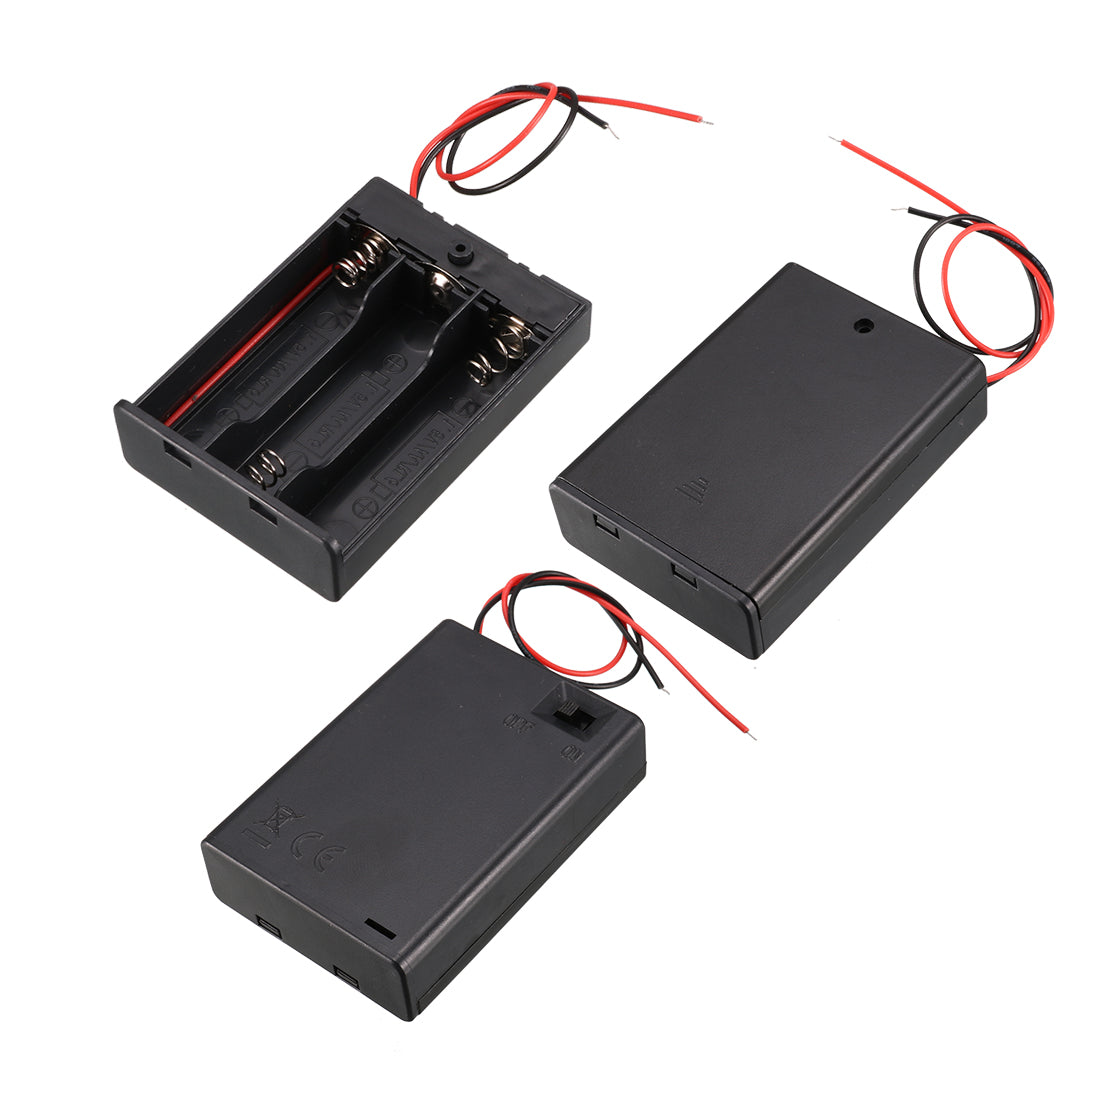 uxcell Uxcell 3pcs 2 Wire Leads Plastic Storage Box Case Holder w Cover for 3x1.5V AA Battery